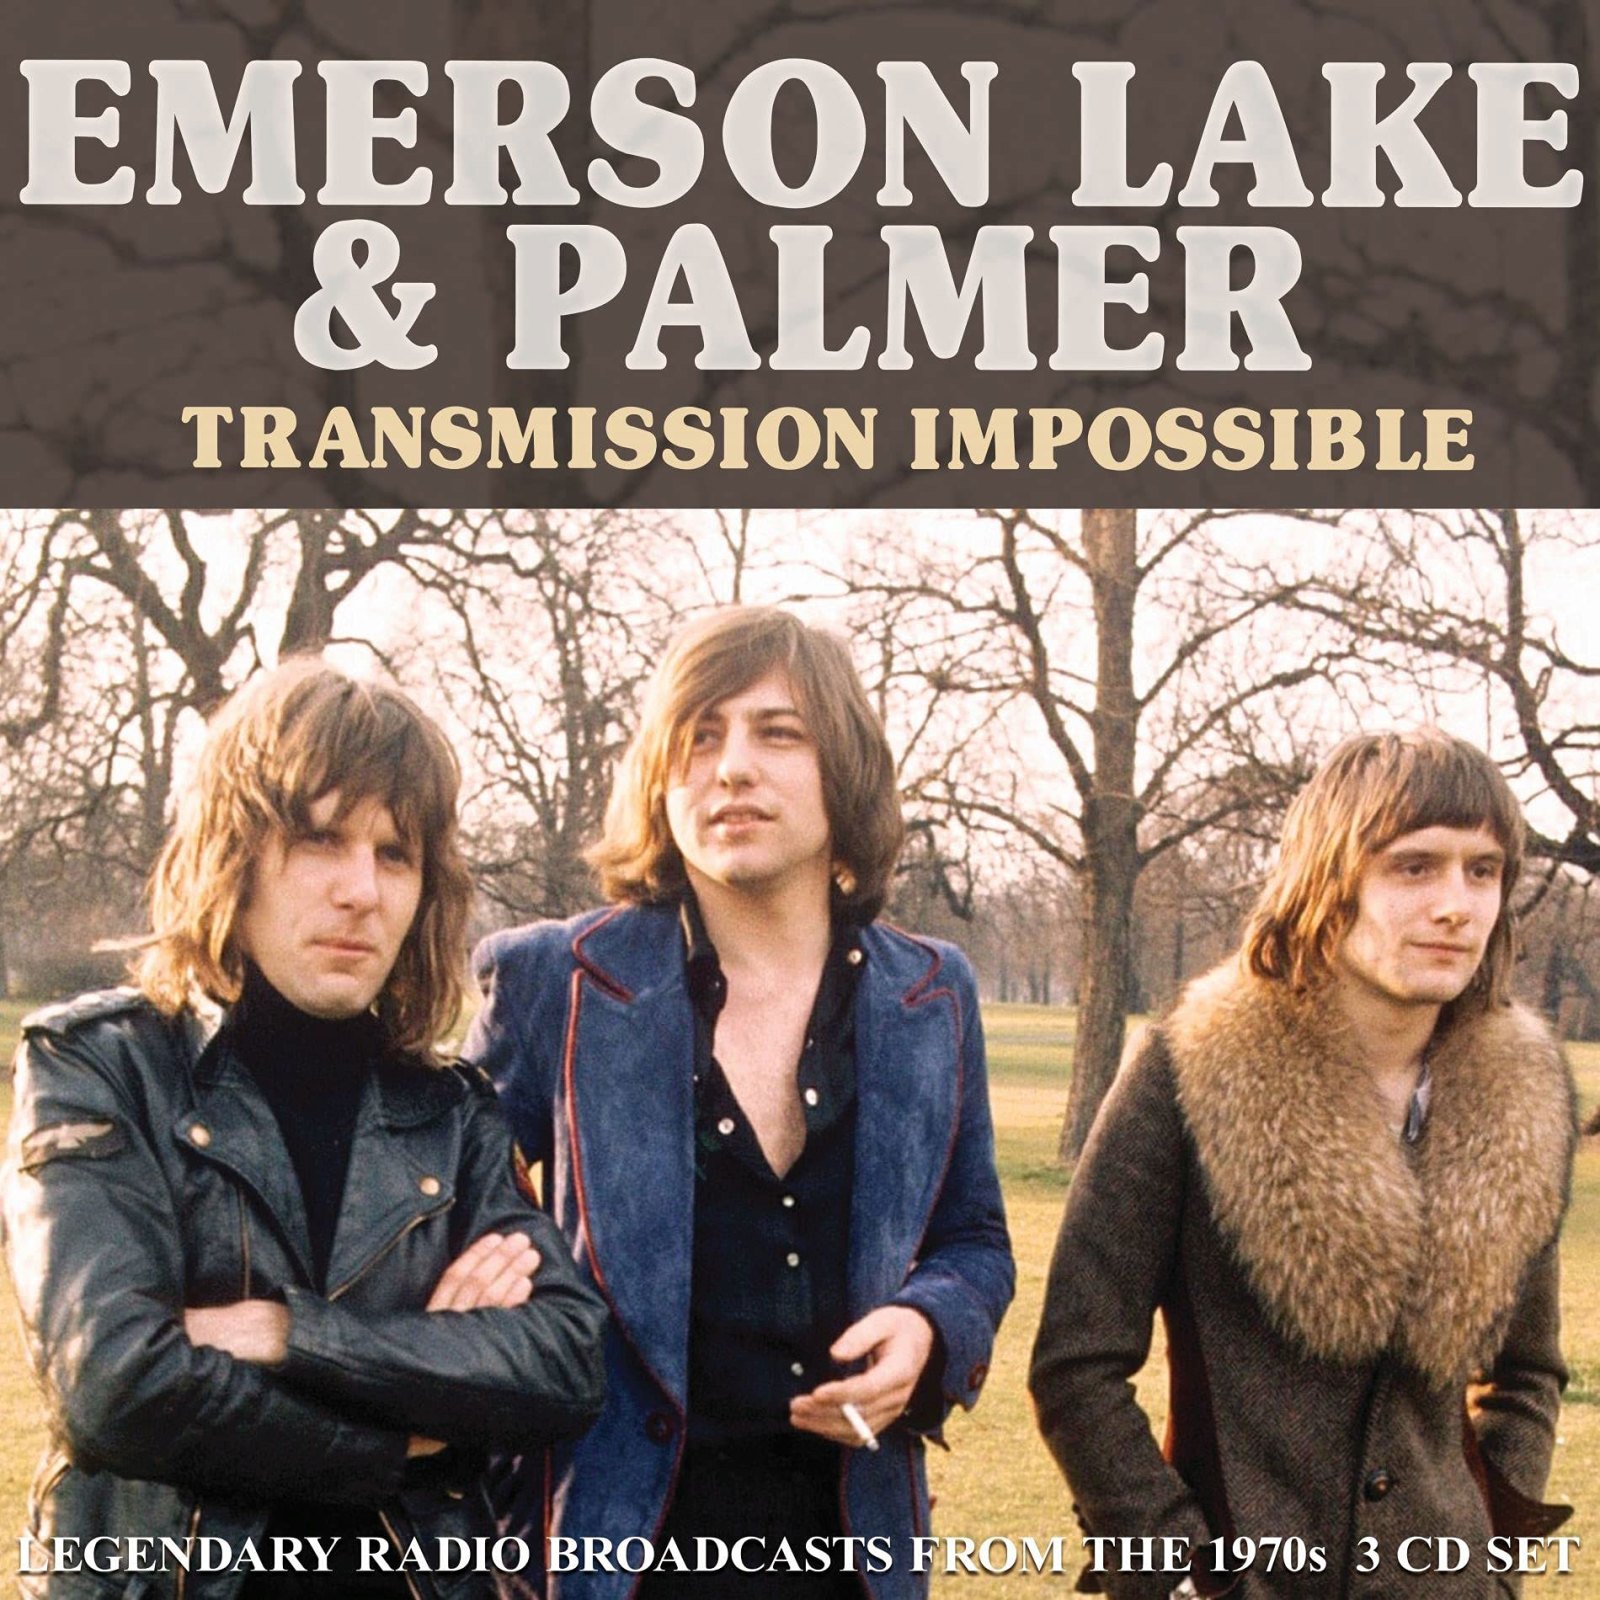 EMERSON LAKE & PALMER - Transmission Impossible - RADIO BROADCAST FROM THE 1970S